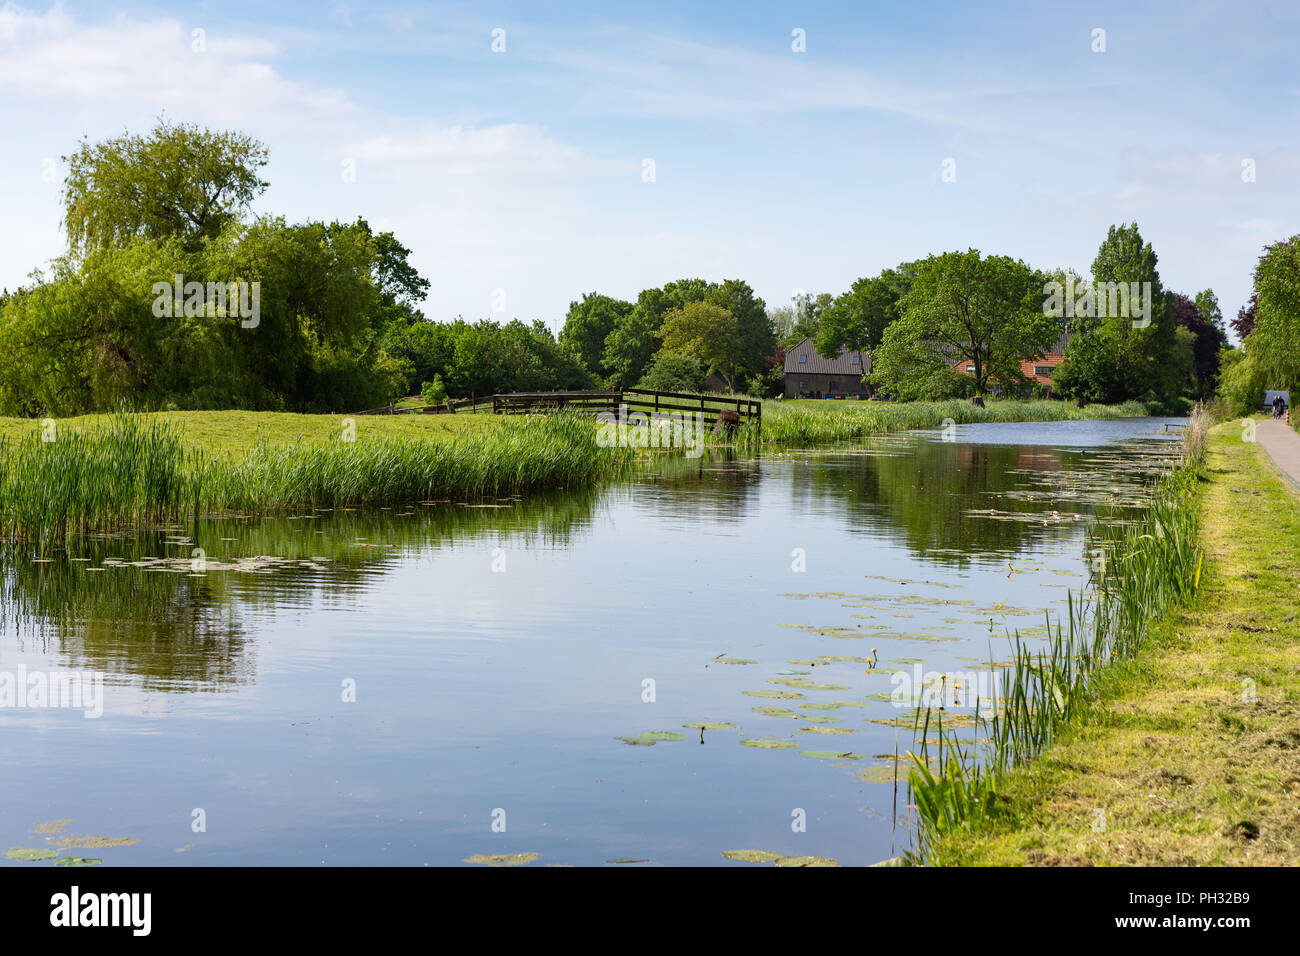 Farmhouse on the water in the Dutch village of Nieuwe Wetering in The Netherlands Stock Photo